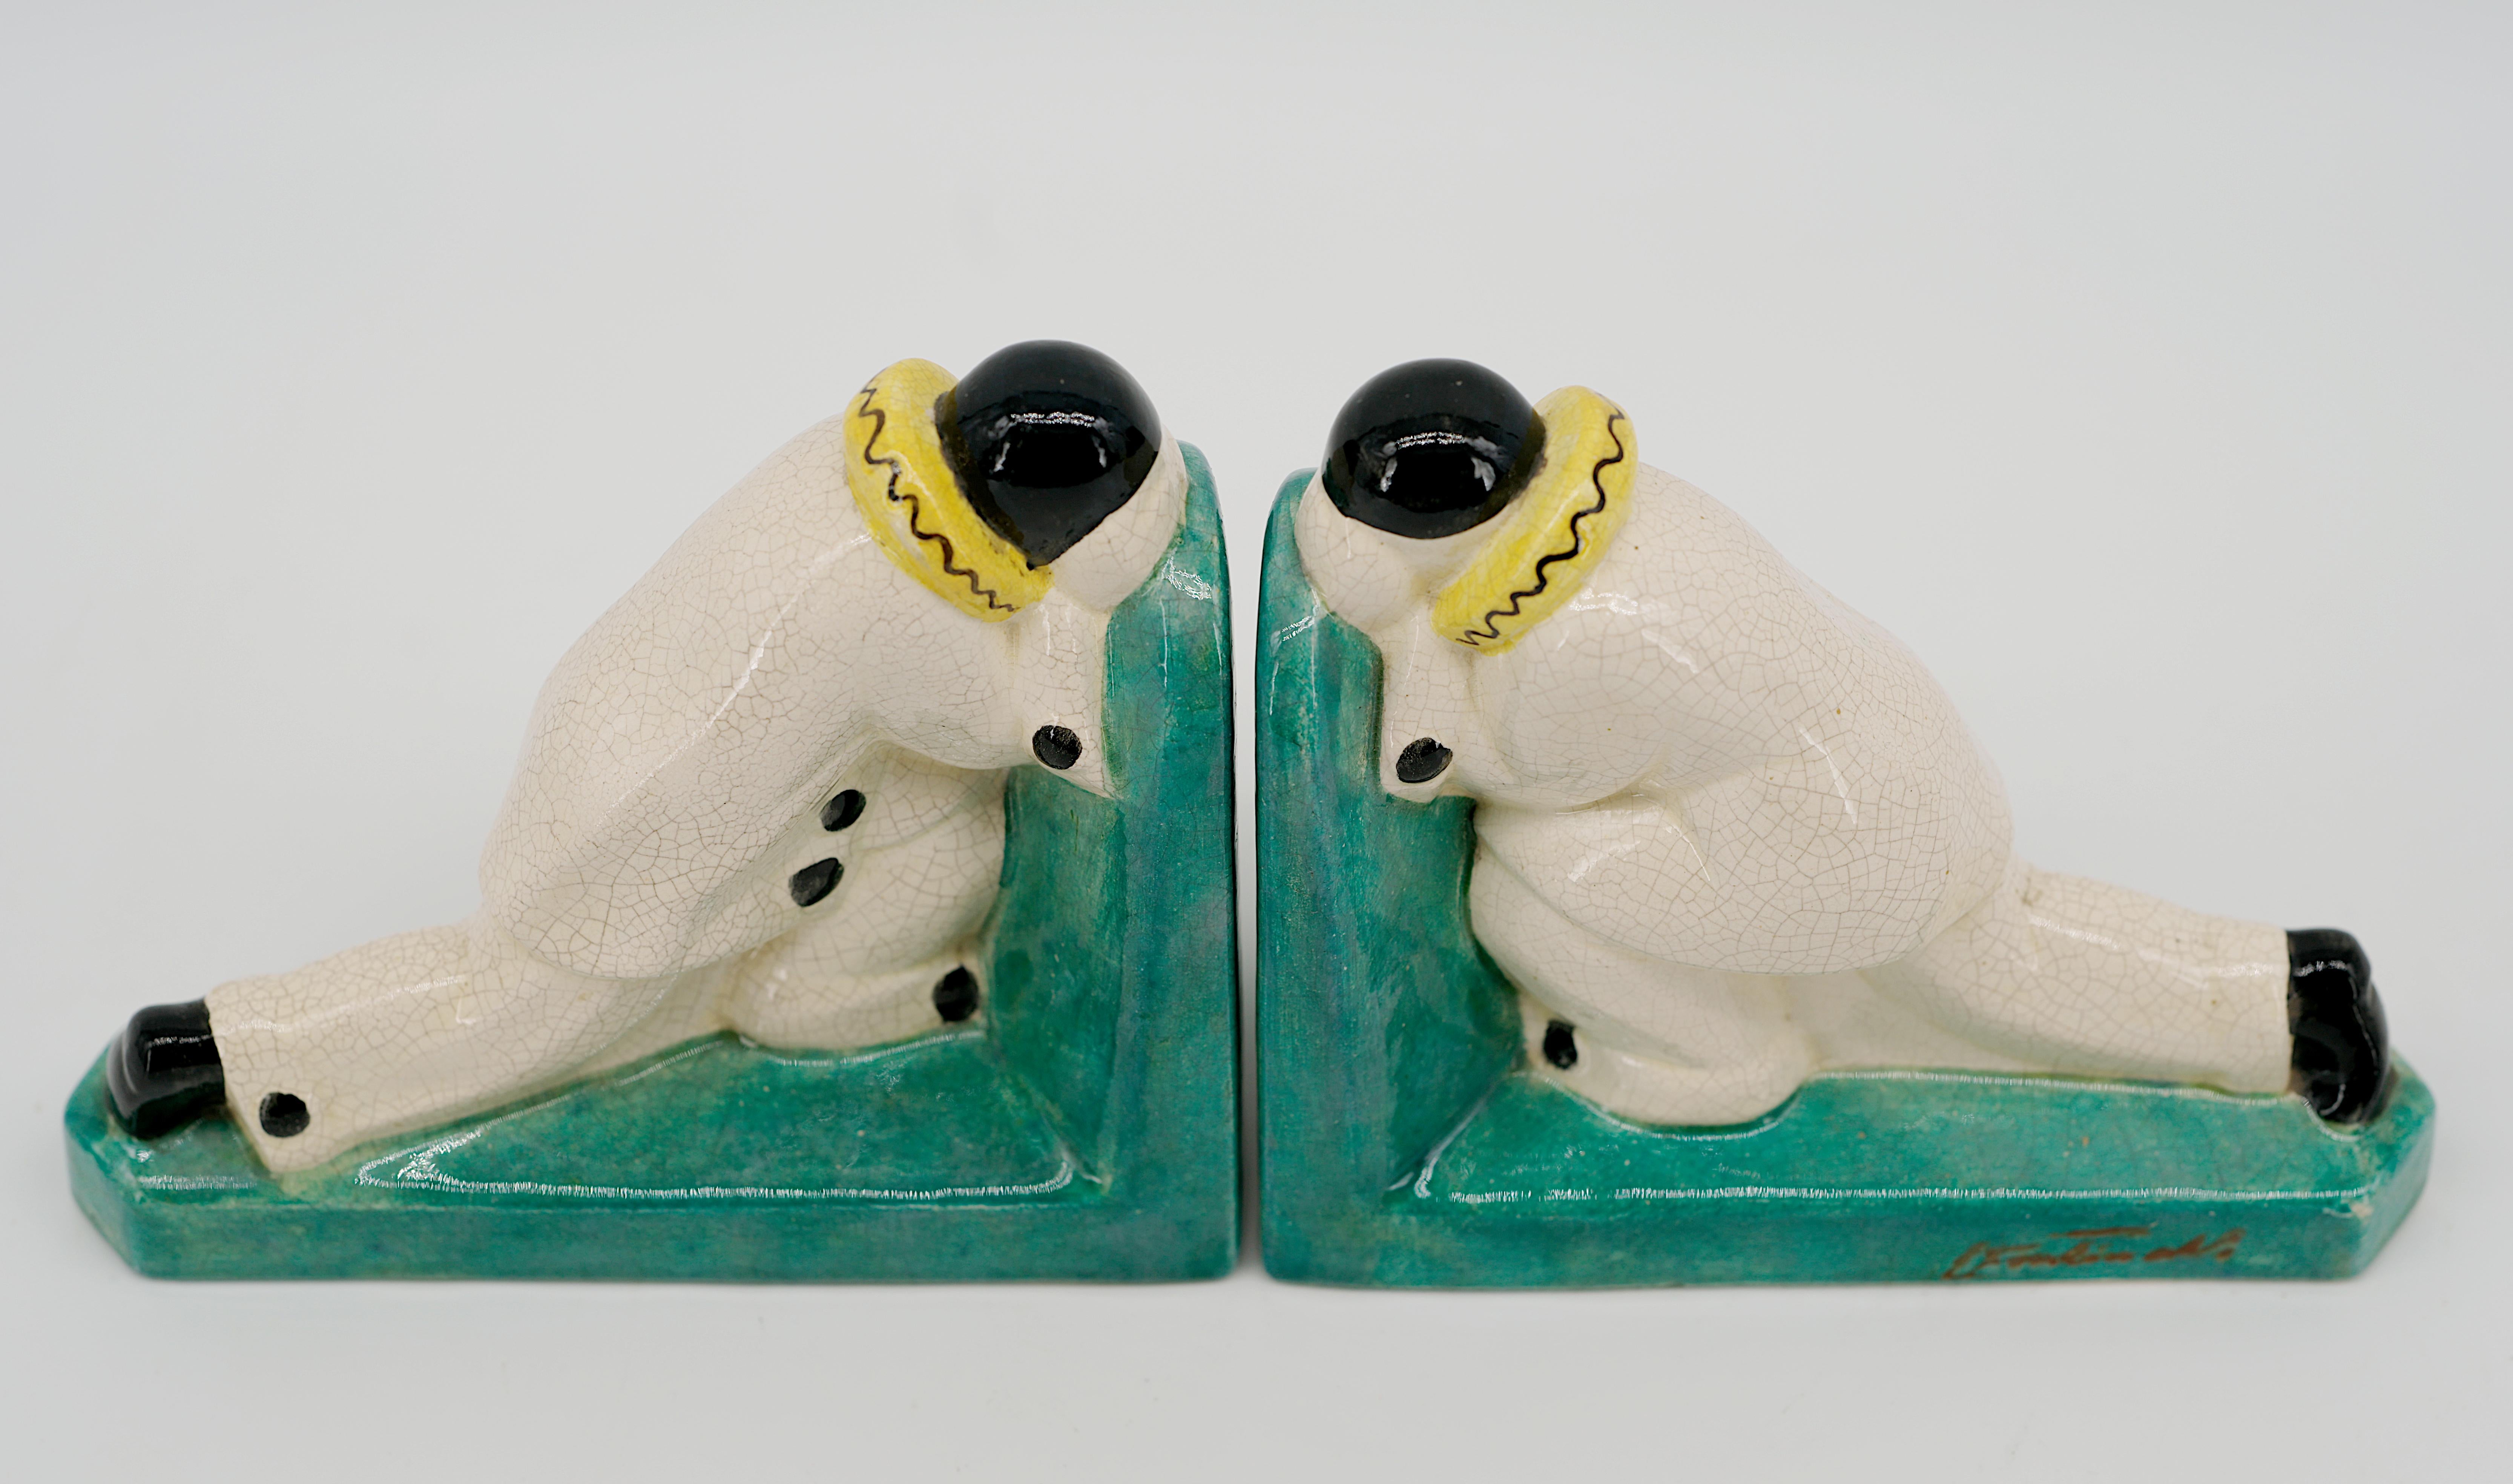 Louis Fontinelle French Art Deco Crackle Glaze Ceramic Pierrot Bookends, 1925 For Sale 2